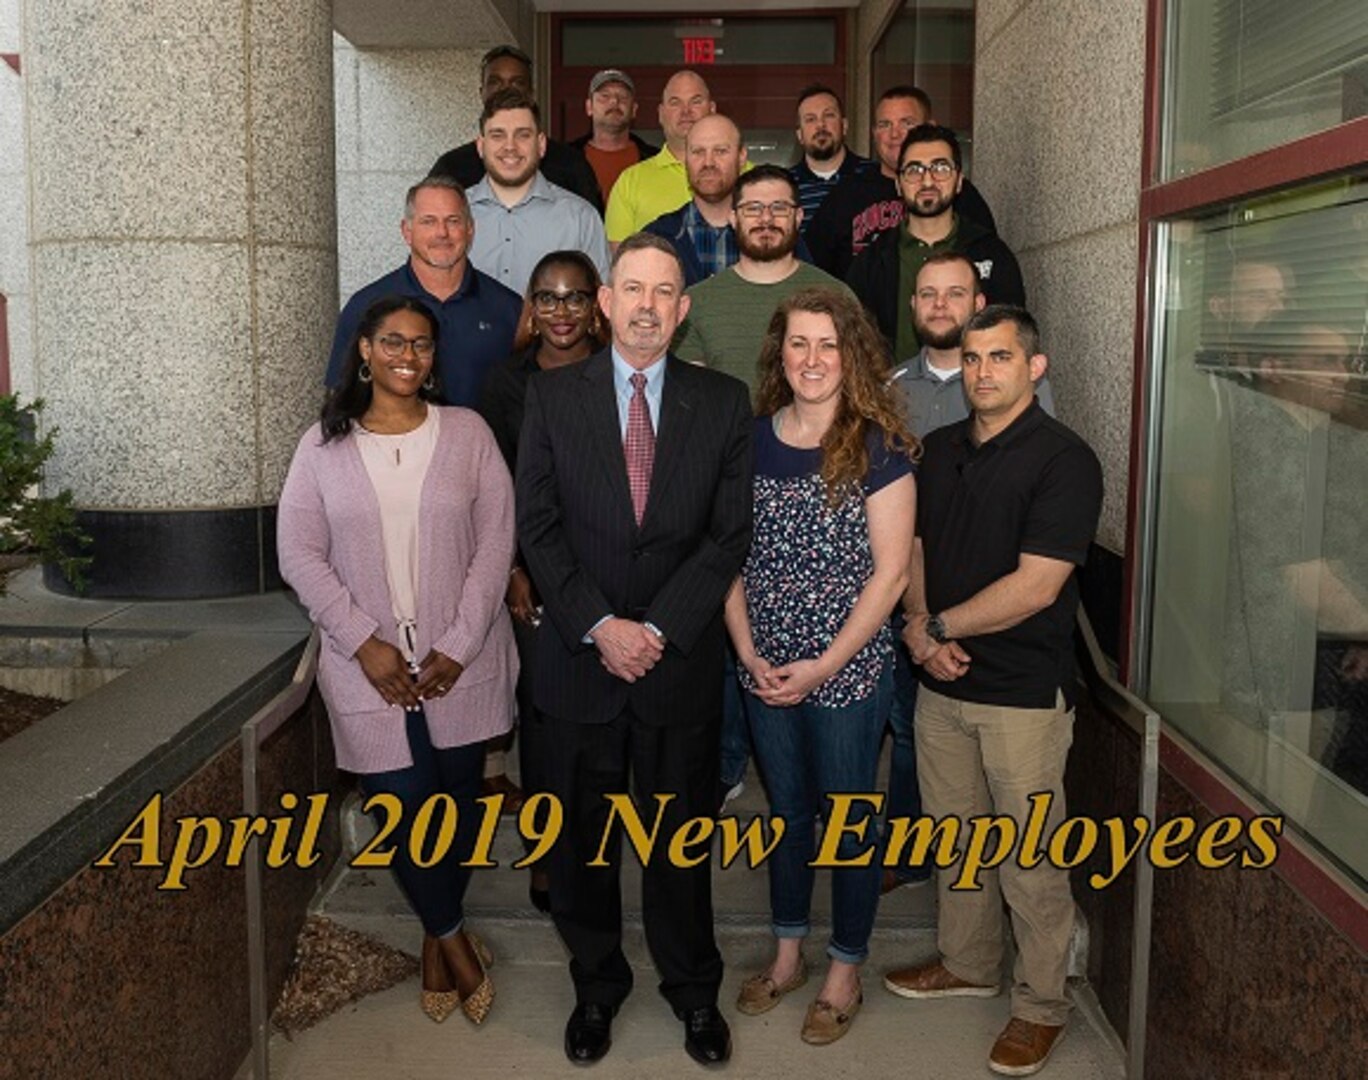 Group photo of 16 new employees with Mr. Warren for the April 2019 NEO